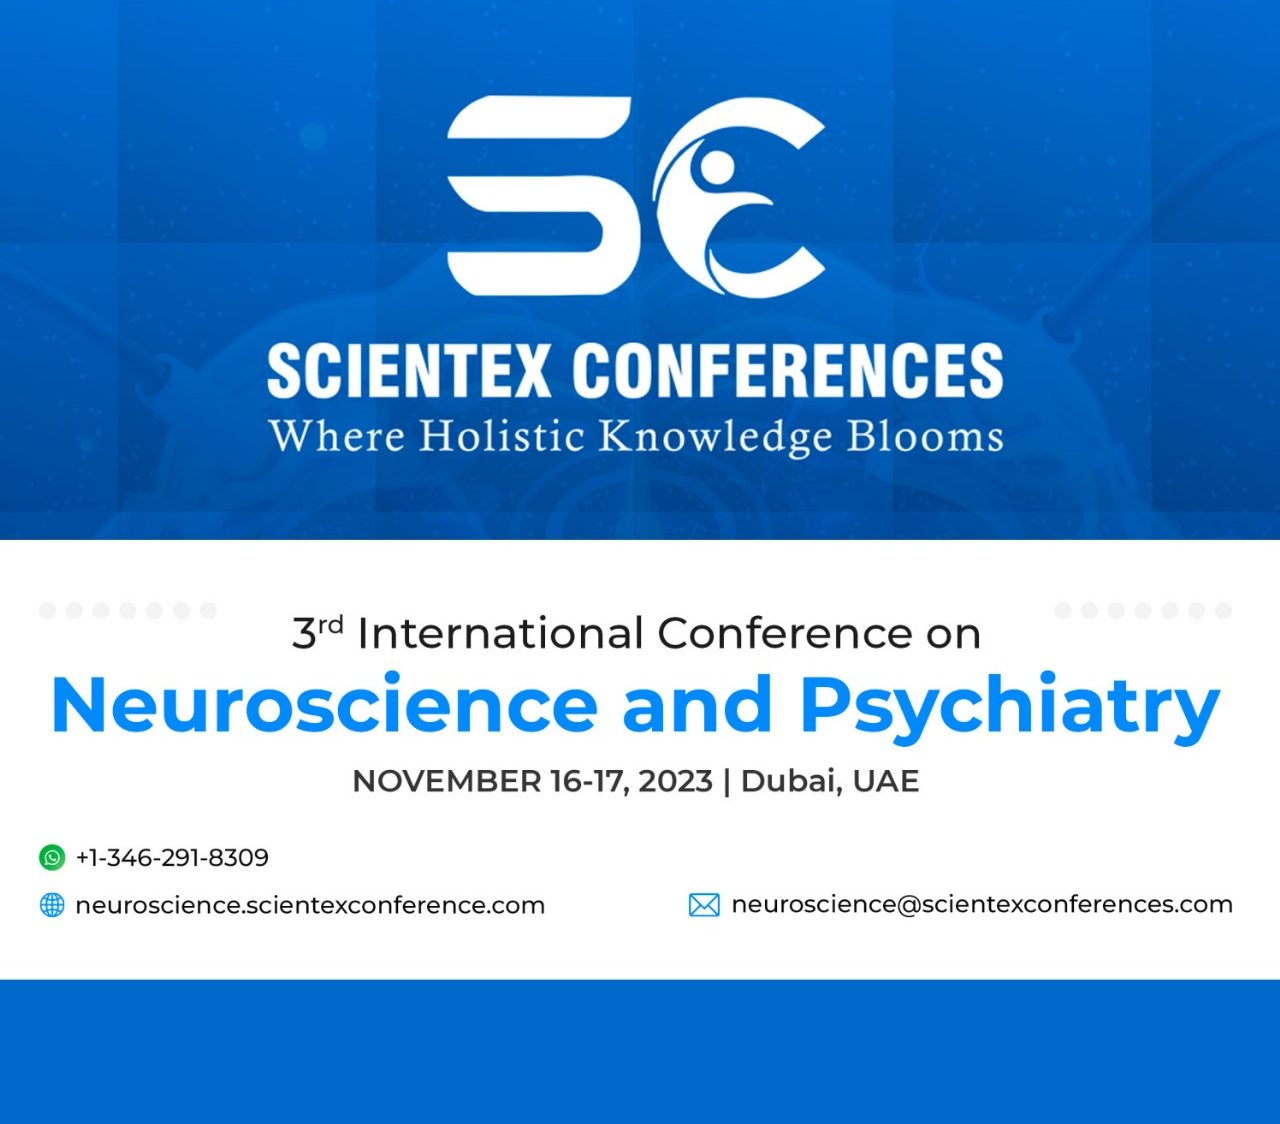 We welcome you all to attend the “3rd International Conference on Neuroscience and Psychiatry” scheduled during November 16-17, 2023 in Dubai, UAE